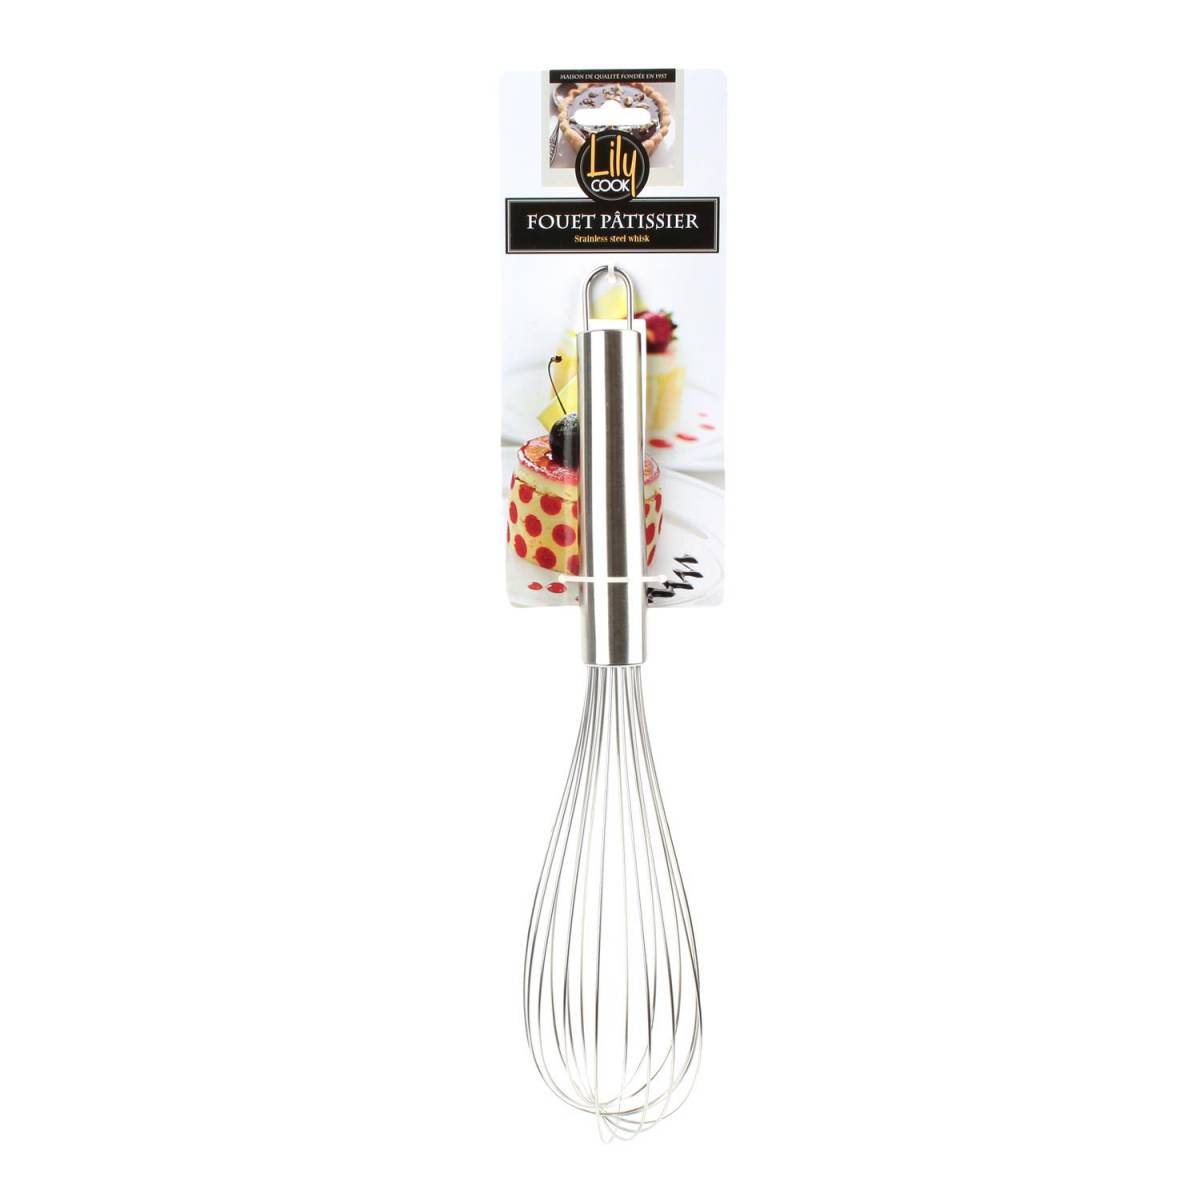 Lily Cook stainless steel whisk 35.5 cm - MaxxiDiscount